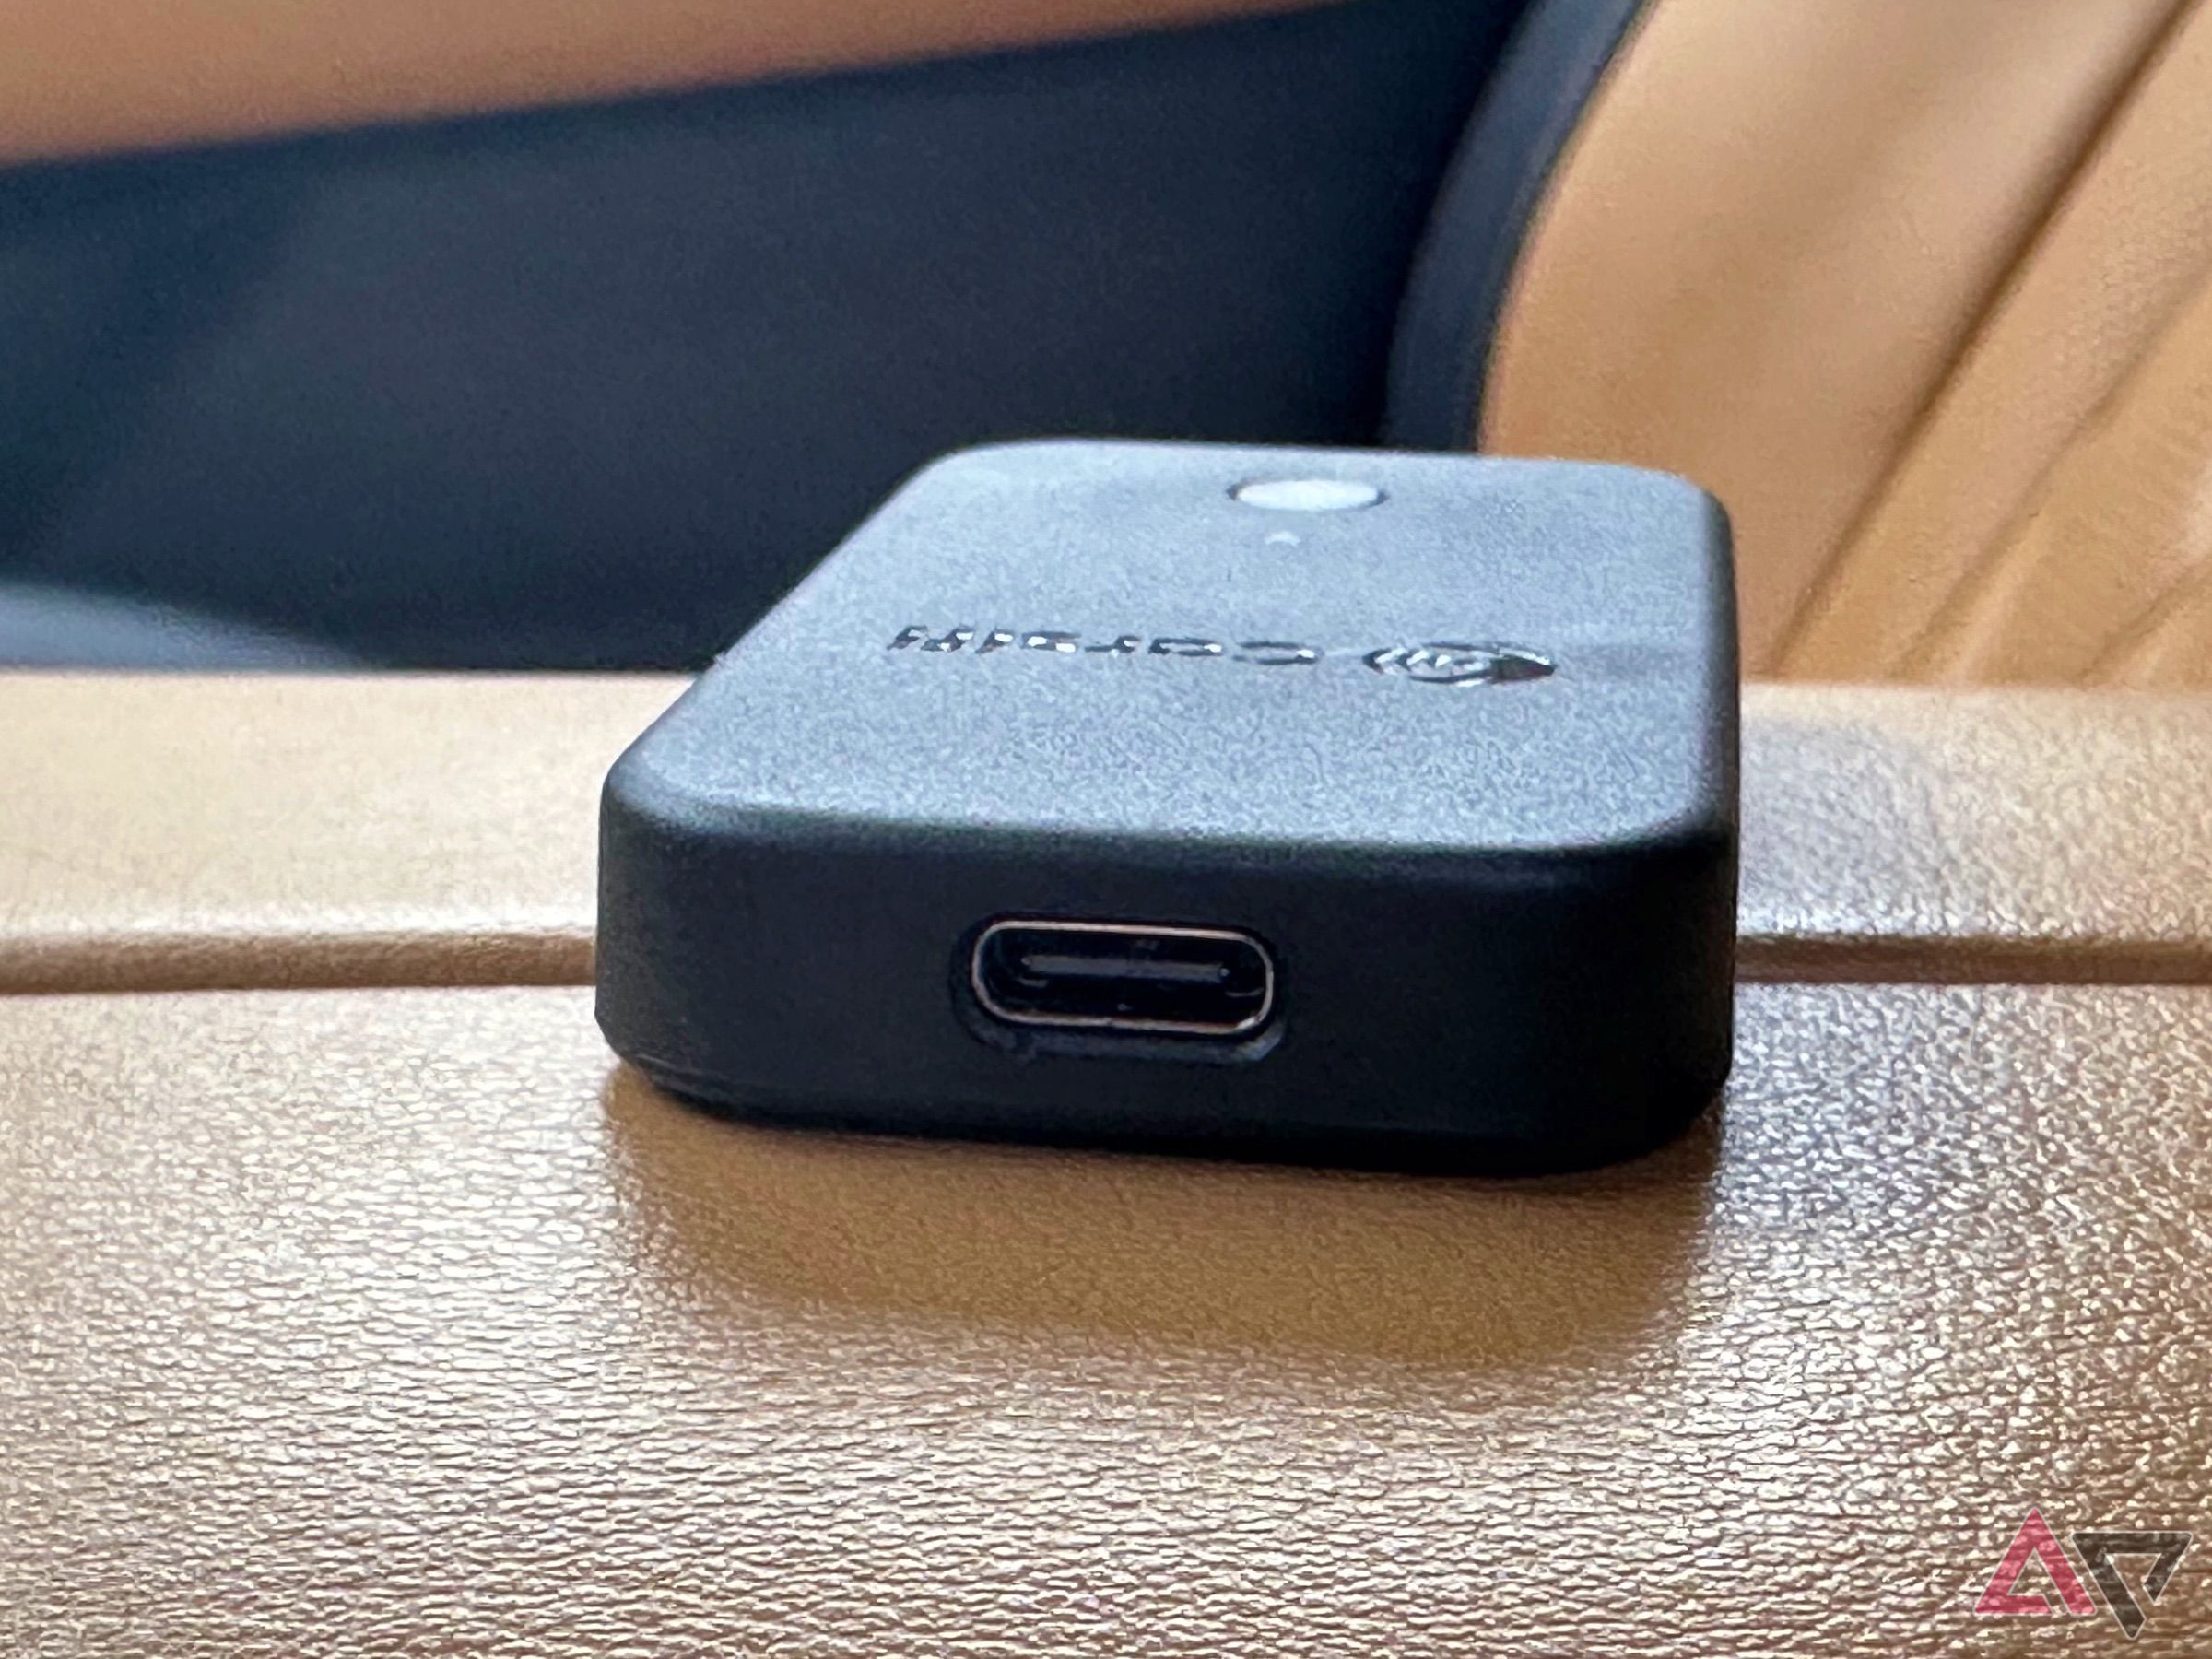 Carsifi Wireless Android Auto Adapter review: A smooth ride for 